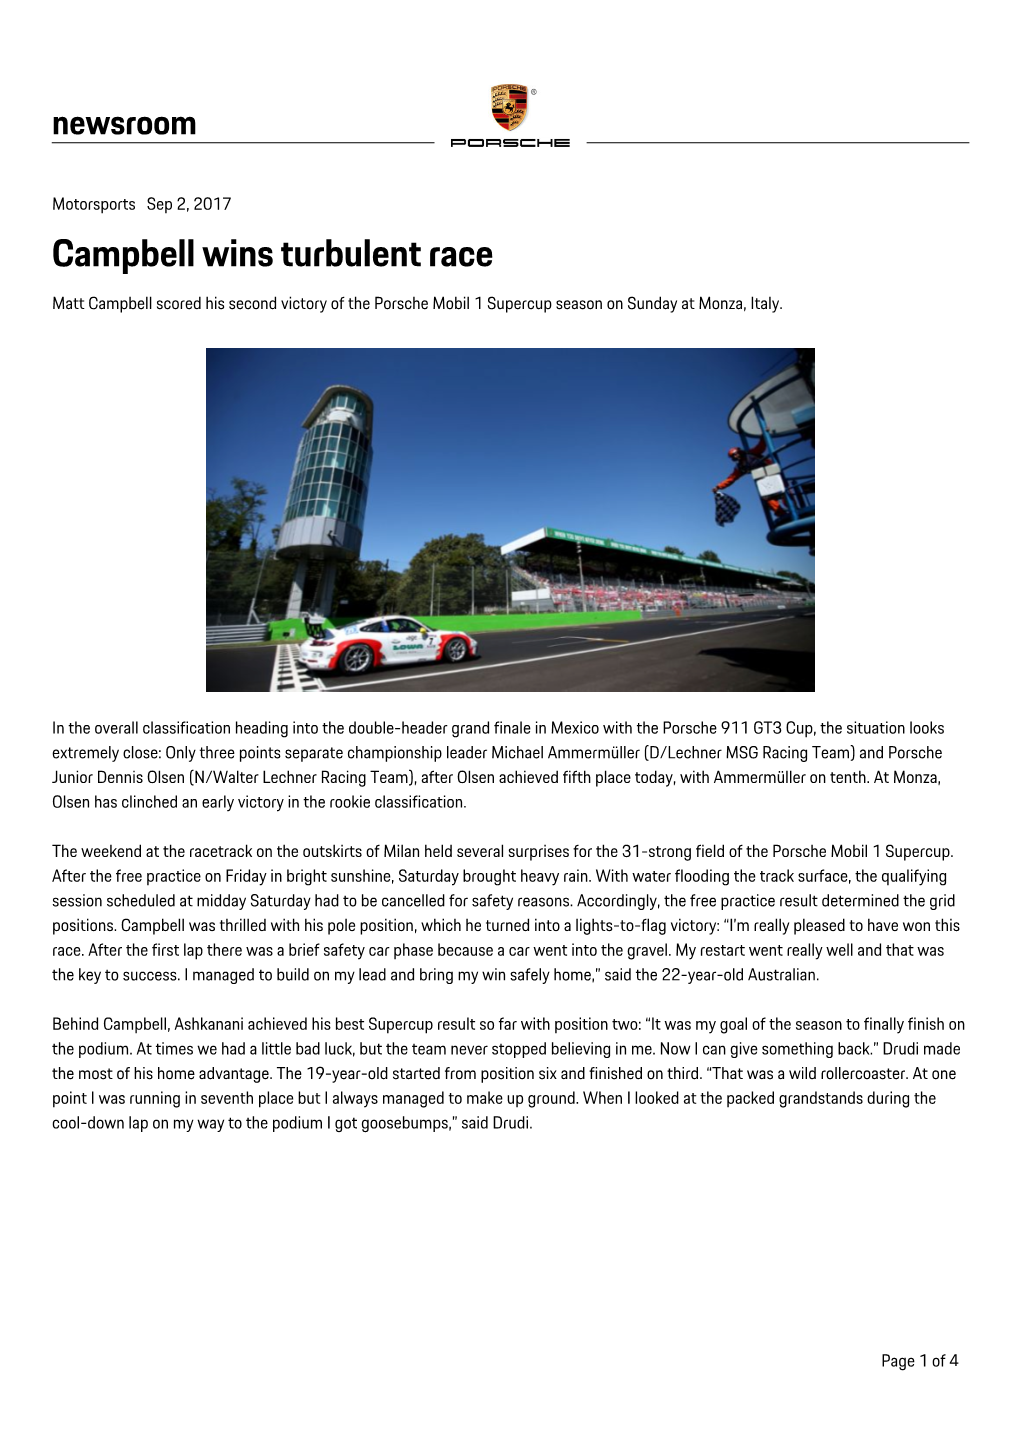 Campbell Wins Turbulent Race Matt Campbell Scored His Second Victory of the Porsche Mobil 1 Supercup Season on Sunday at Monza, Italy